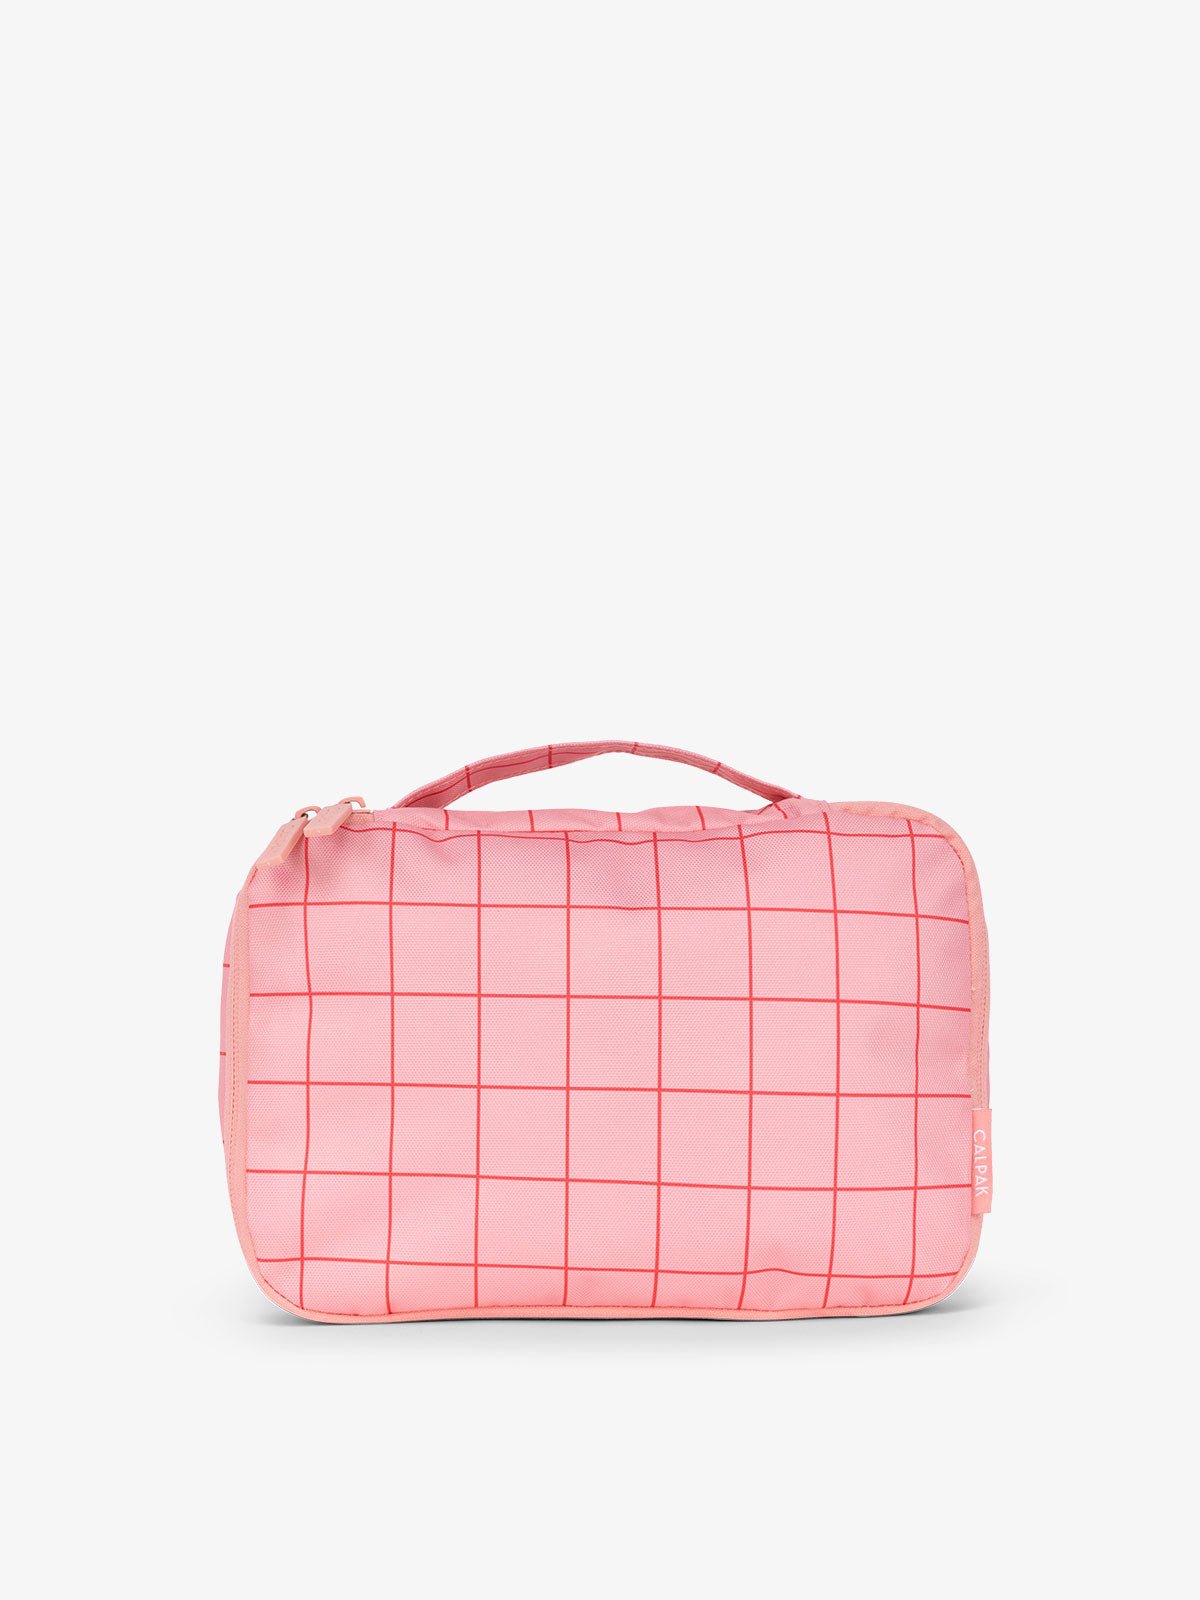 CALPAK small packing cubes with top handle in pink grid